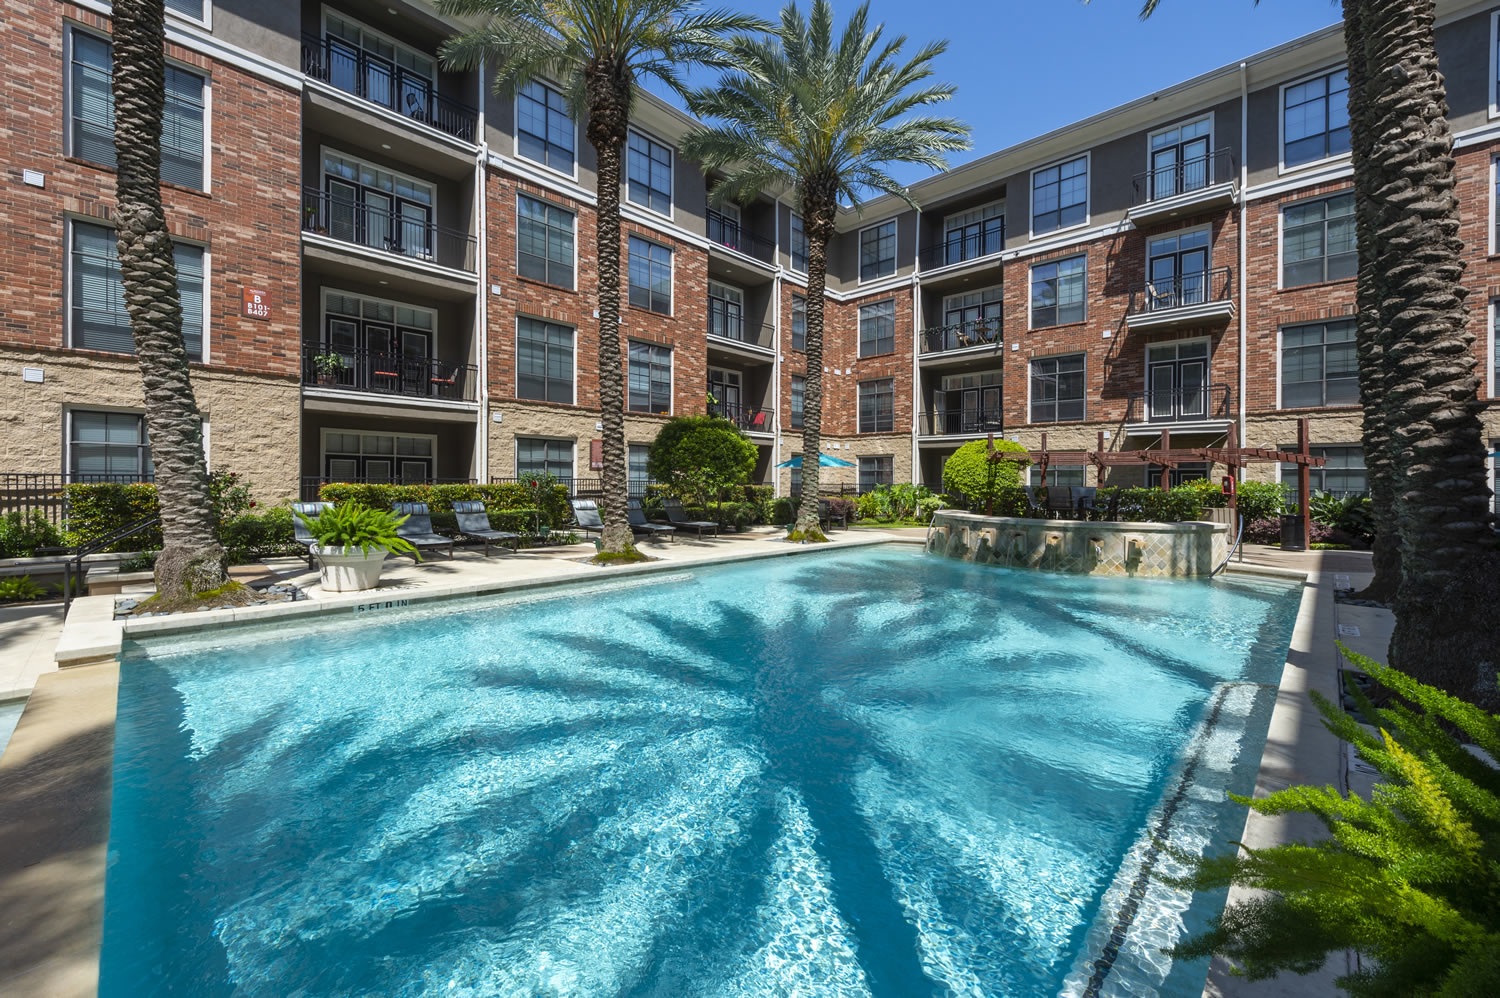 Apartments in Uptown Houston, Galleria Area A swimming pool at an apartment complex in the Uptown Houston area.